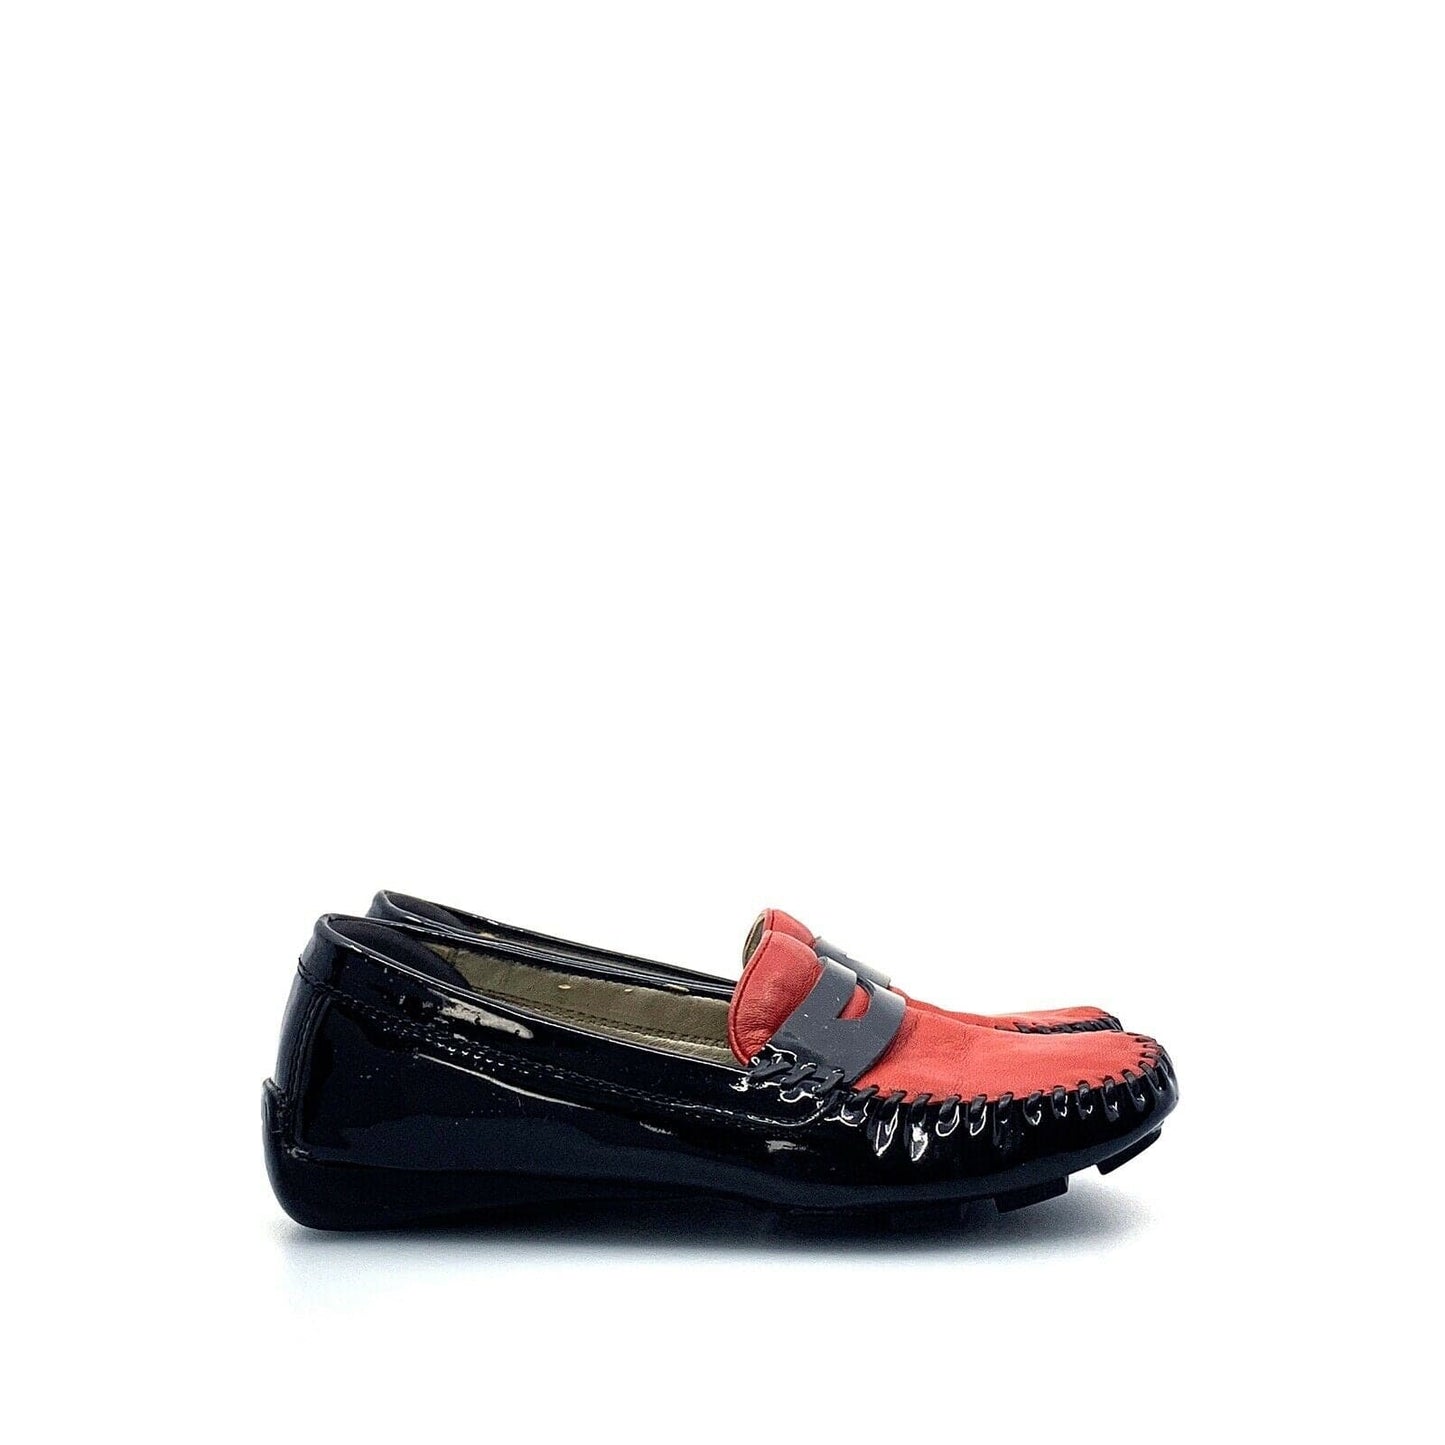 Robert Zur Womens Size 4.5M Black Red Moccasins Shoes Patent Leather Flats